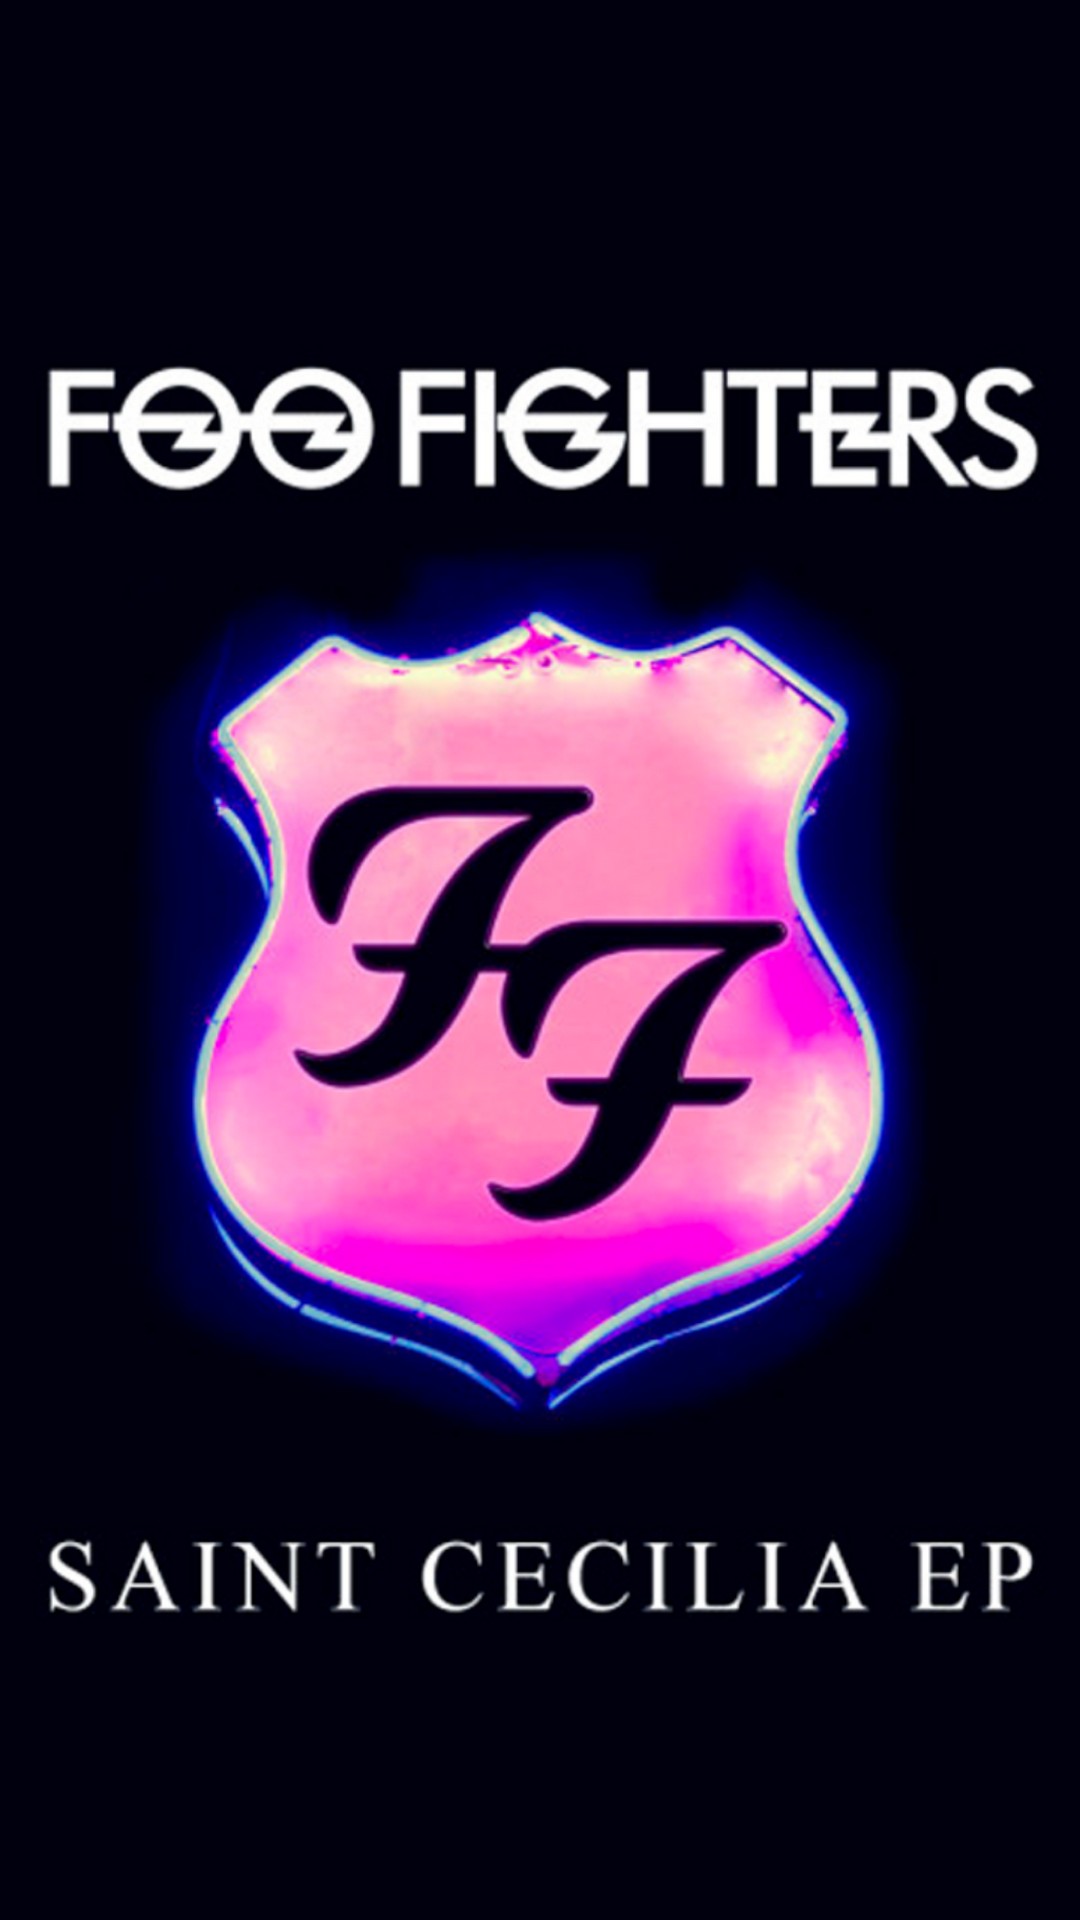 Foo Fighters Android Wallpaper resolution 1080x1920